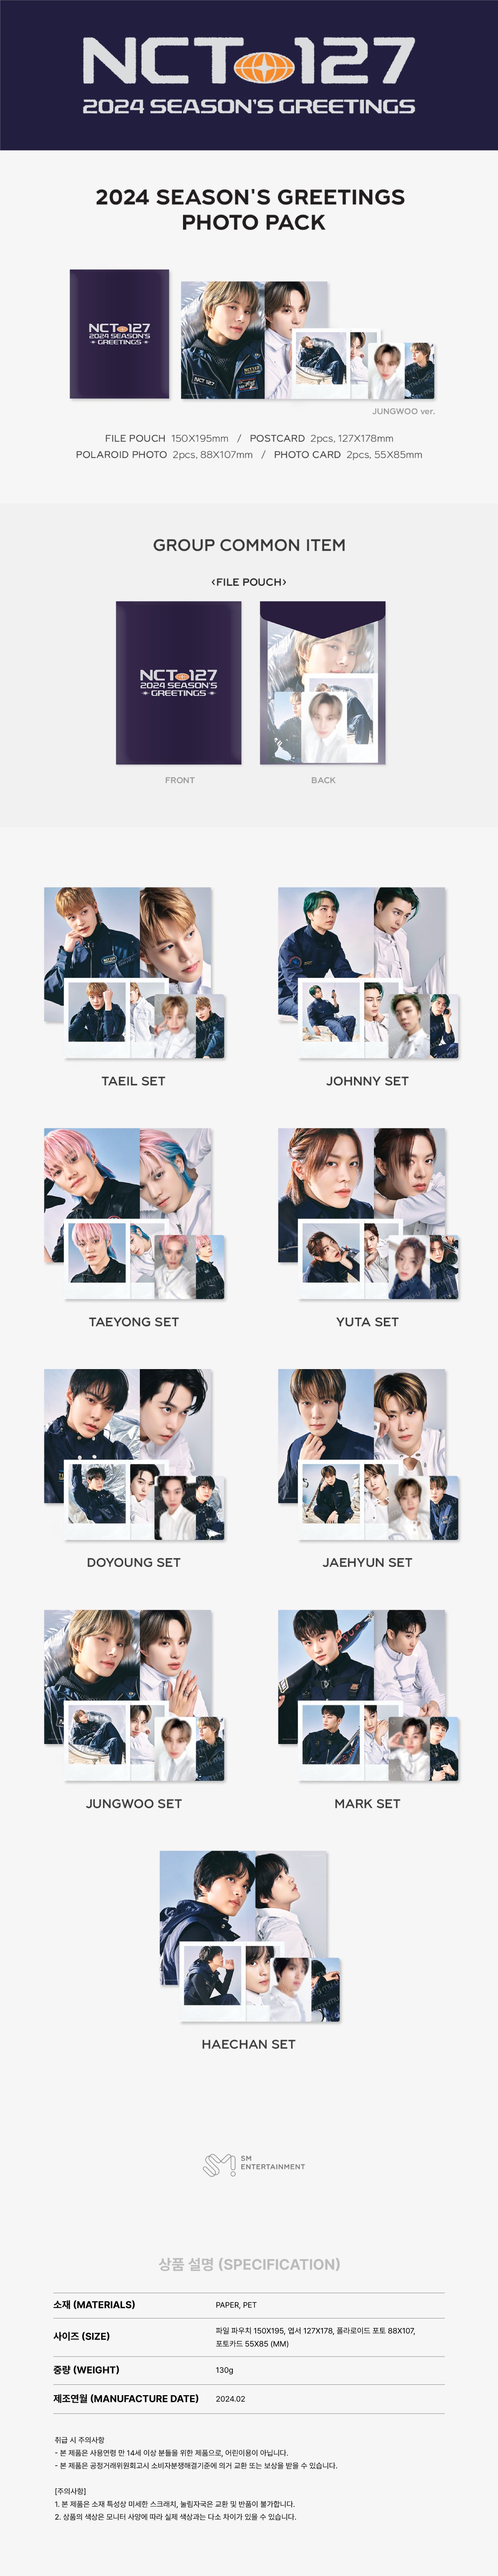 NCT 127 - [2024 SEASON'S GREETINGS OFFICIAL MD] Photo Pack